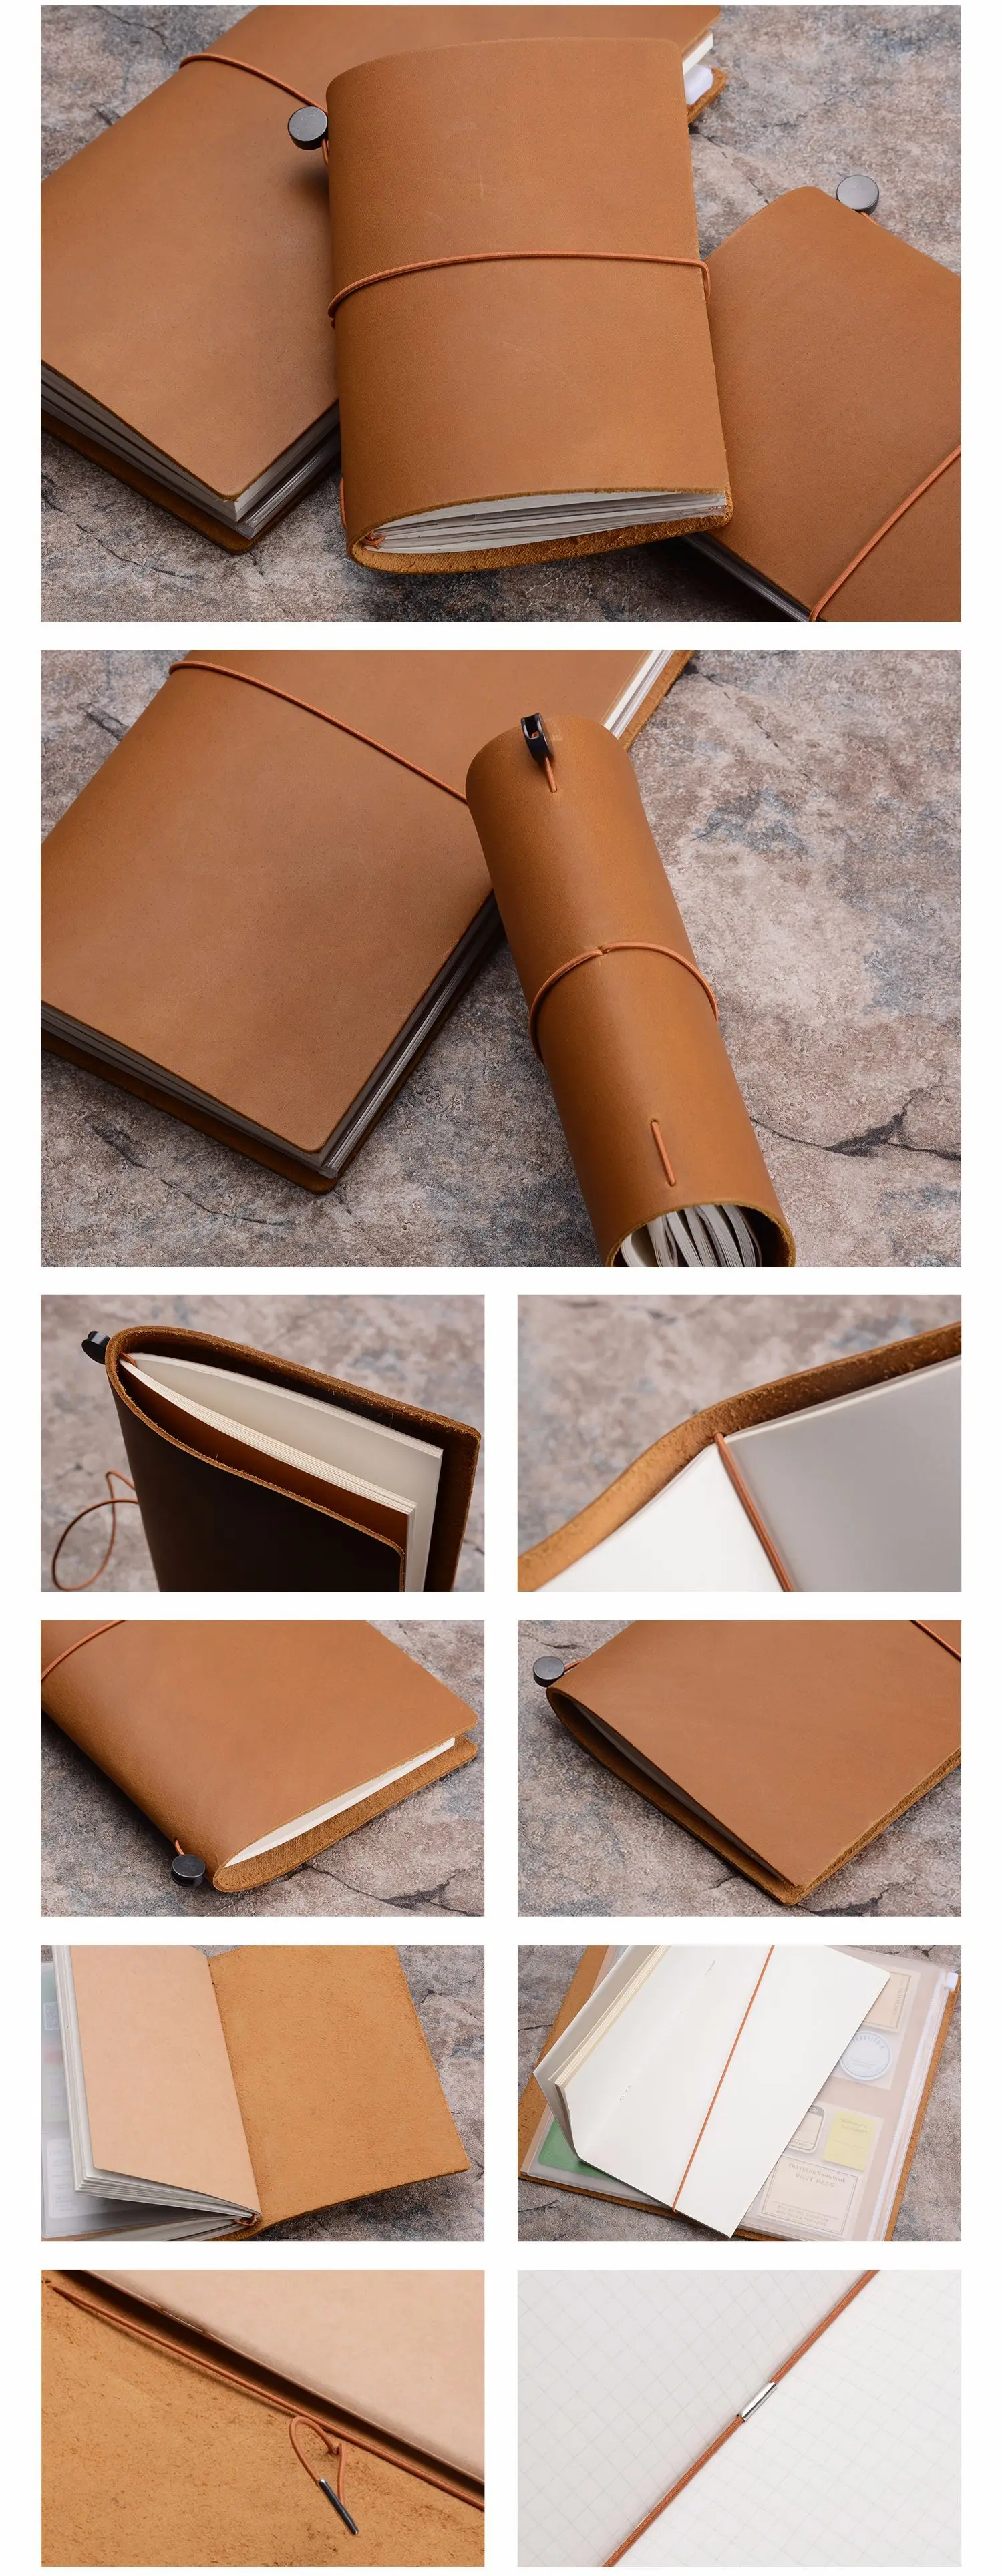 Boshiho Vintage Retro Handmade Leather Lined Journal Refillable Diary ...